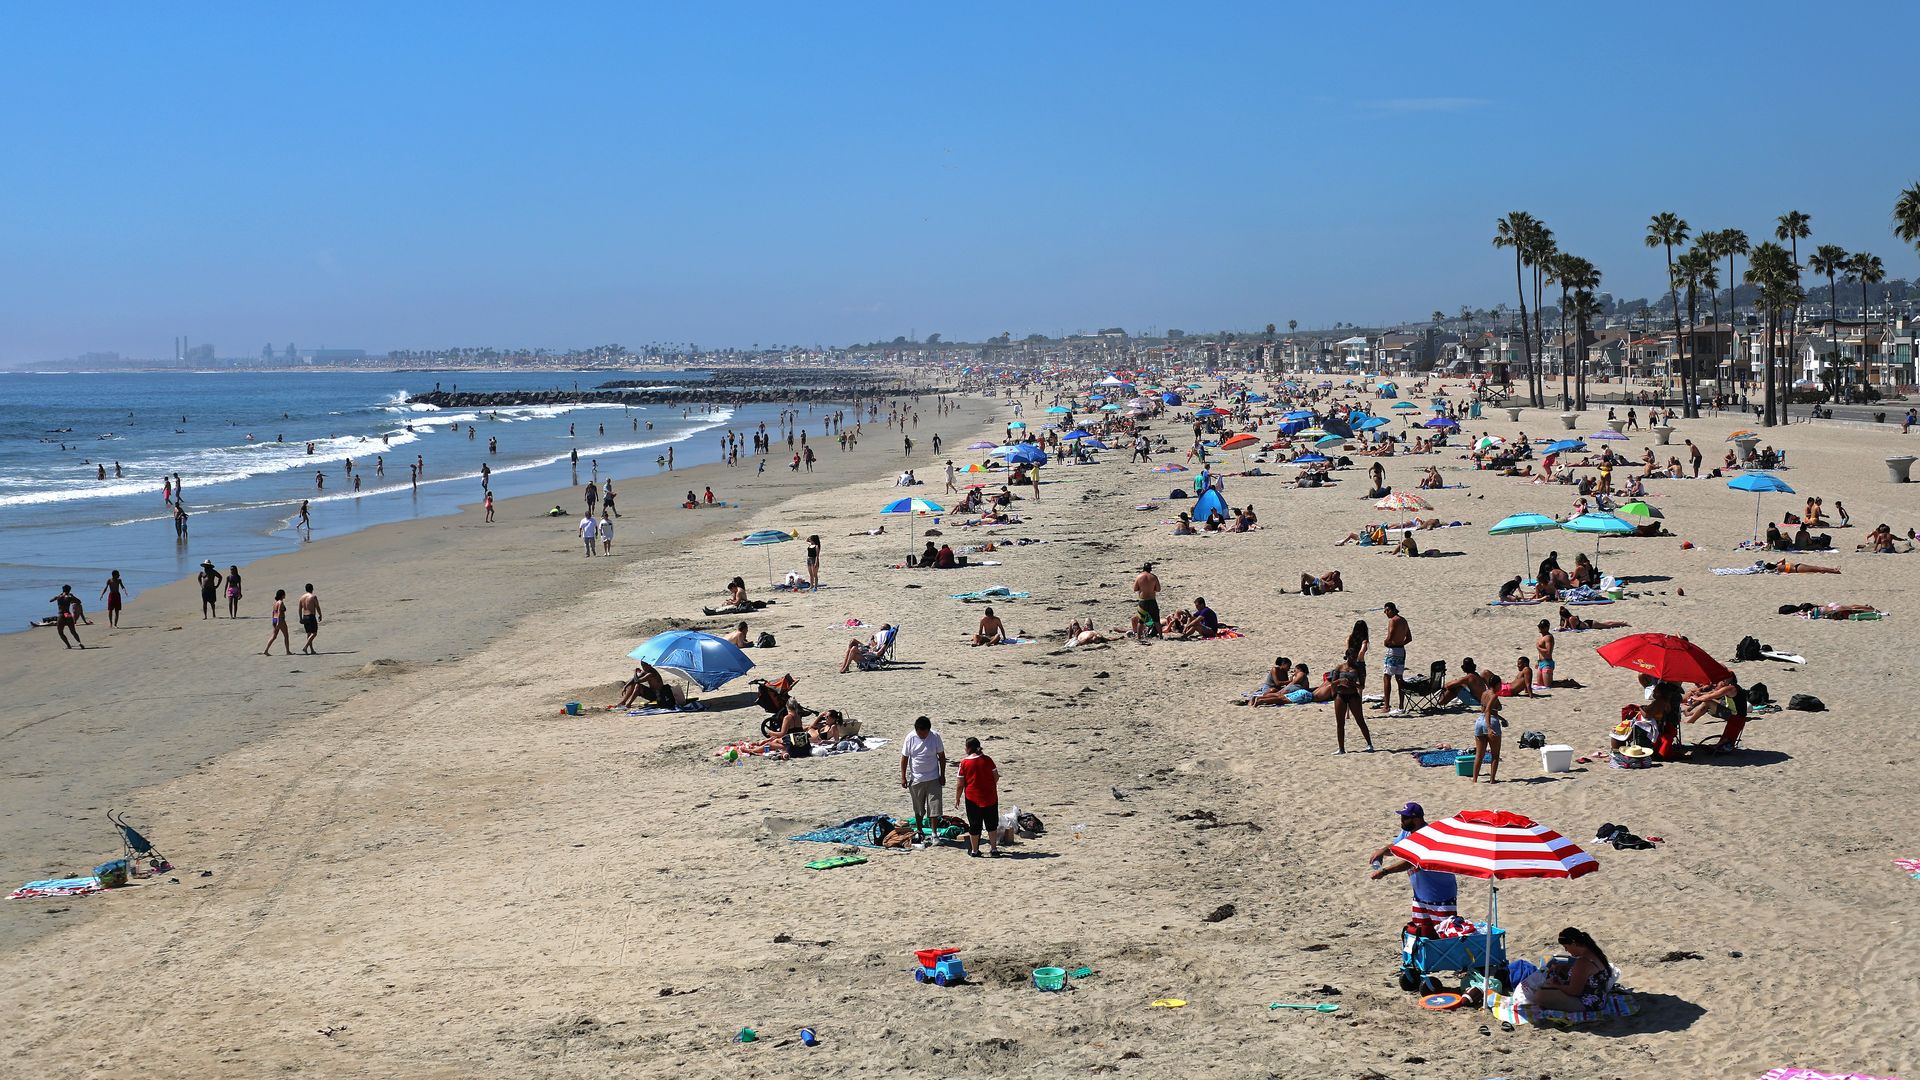 People are seen gathering on the beach north of Newport Beach Pier on April 25, 2020 in Newport Beach, California.